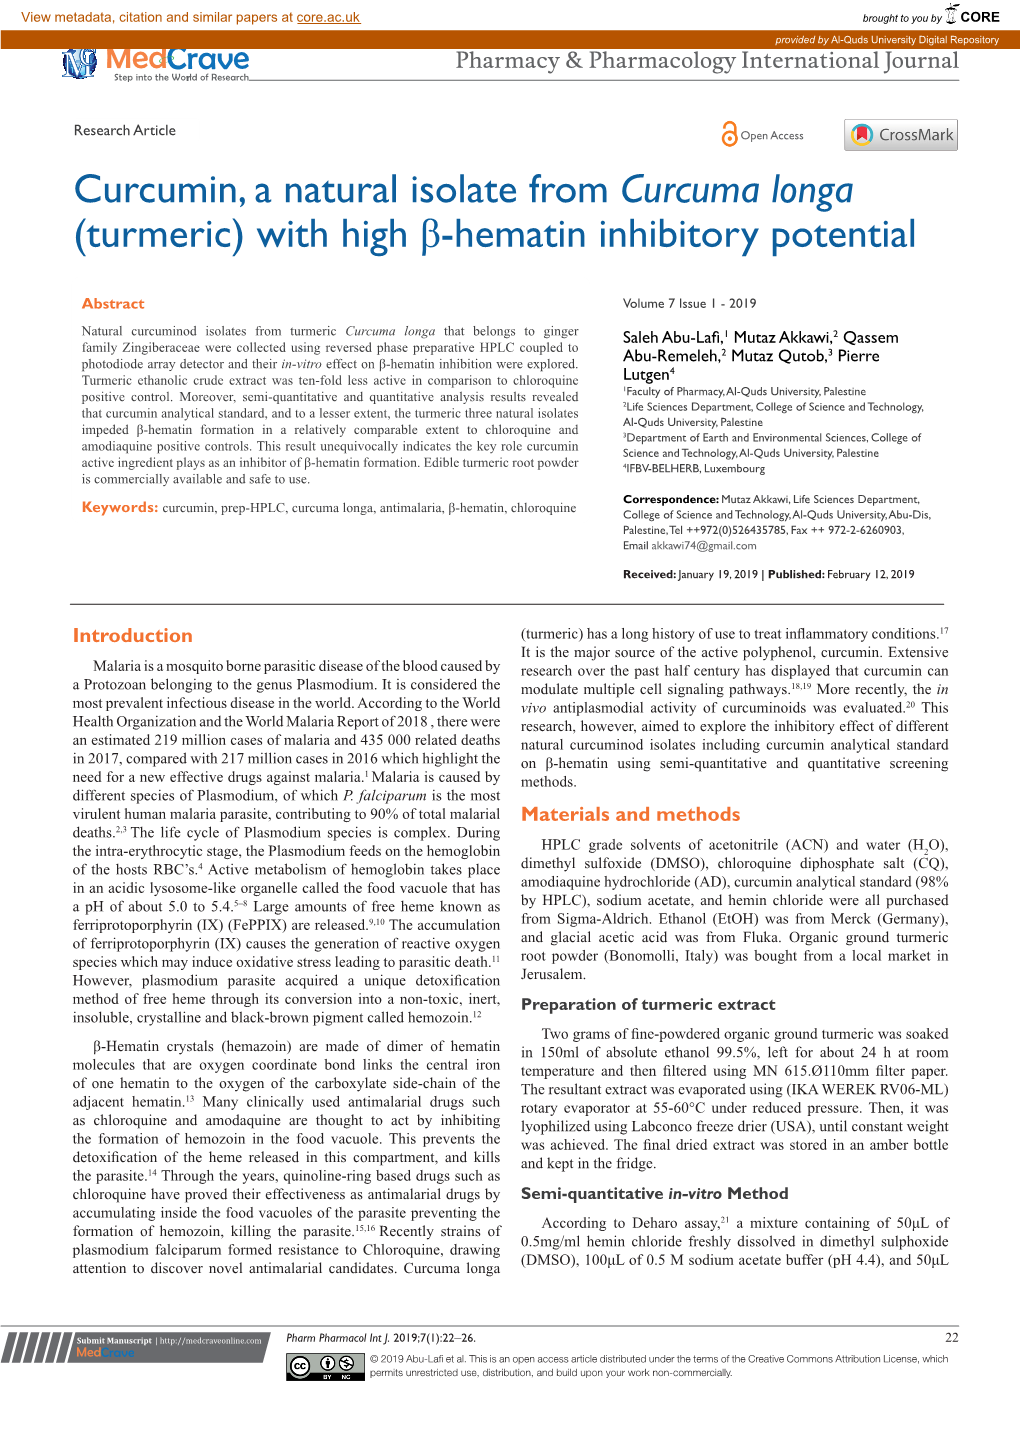 Turmeric) with High Β-Hematin Inhibitory Potential